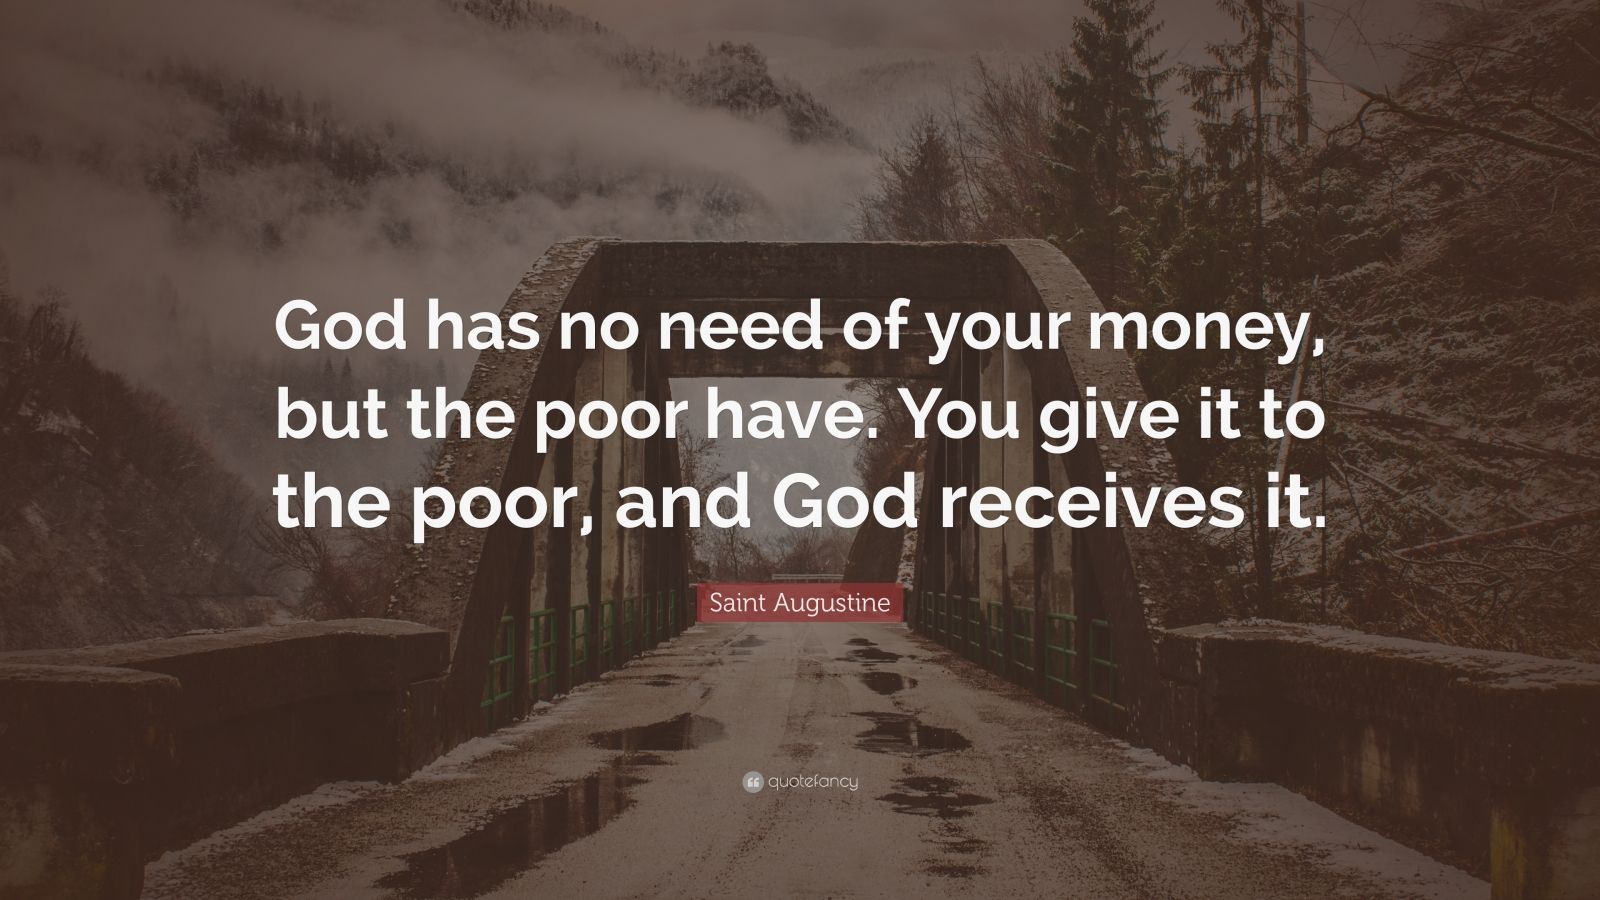 4715062 Saint Augustine Quote God has no need of your money but the poor